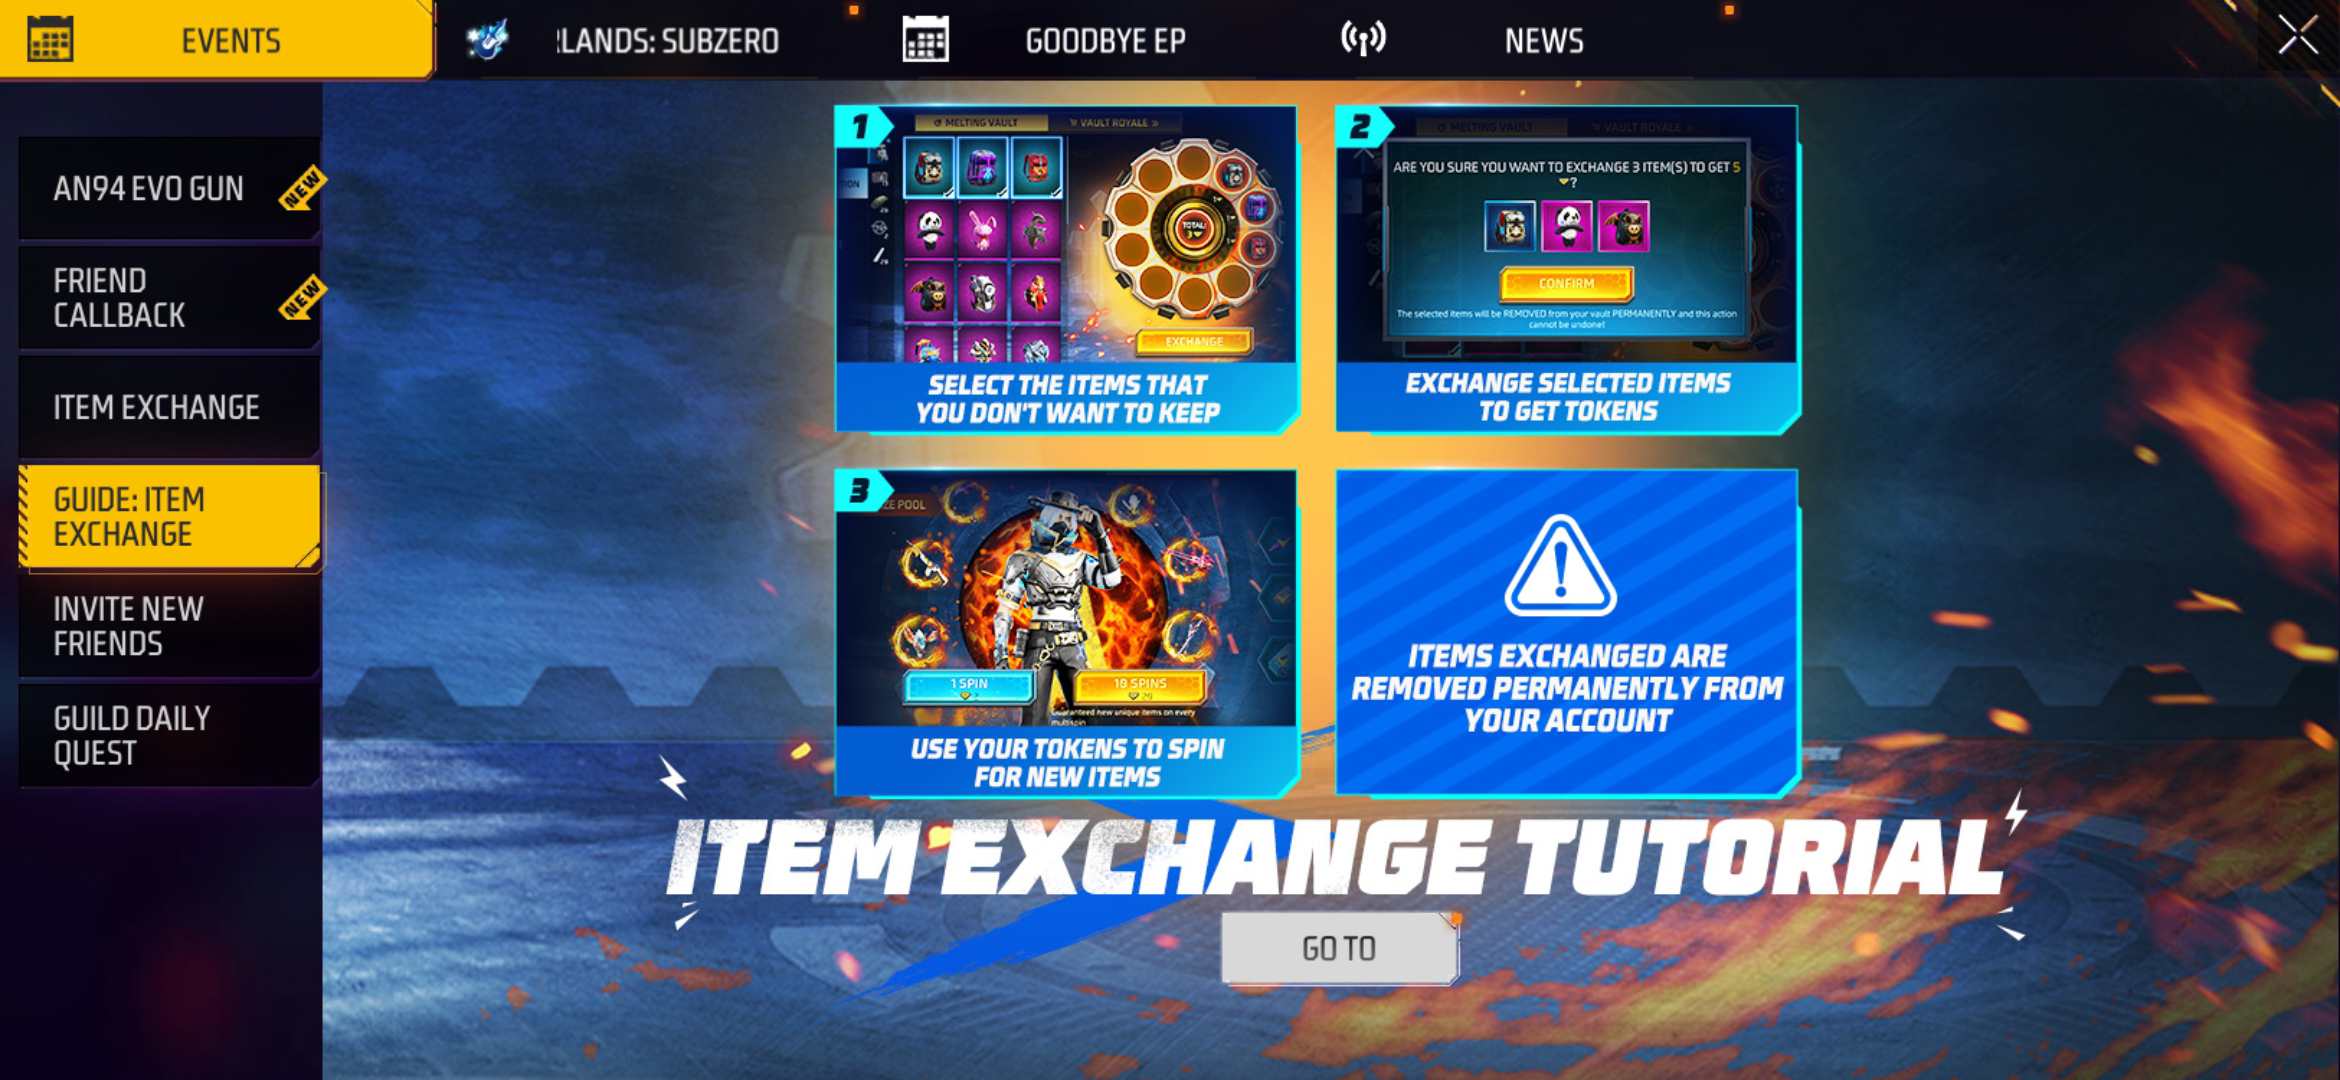 Exchange Useless Items To Get Free And Premium Items For Free